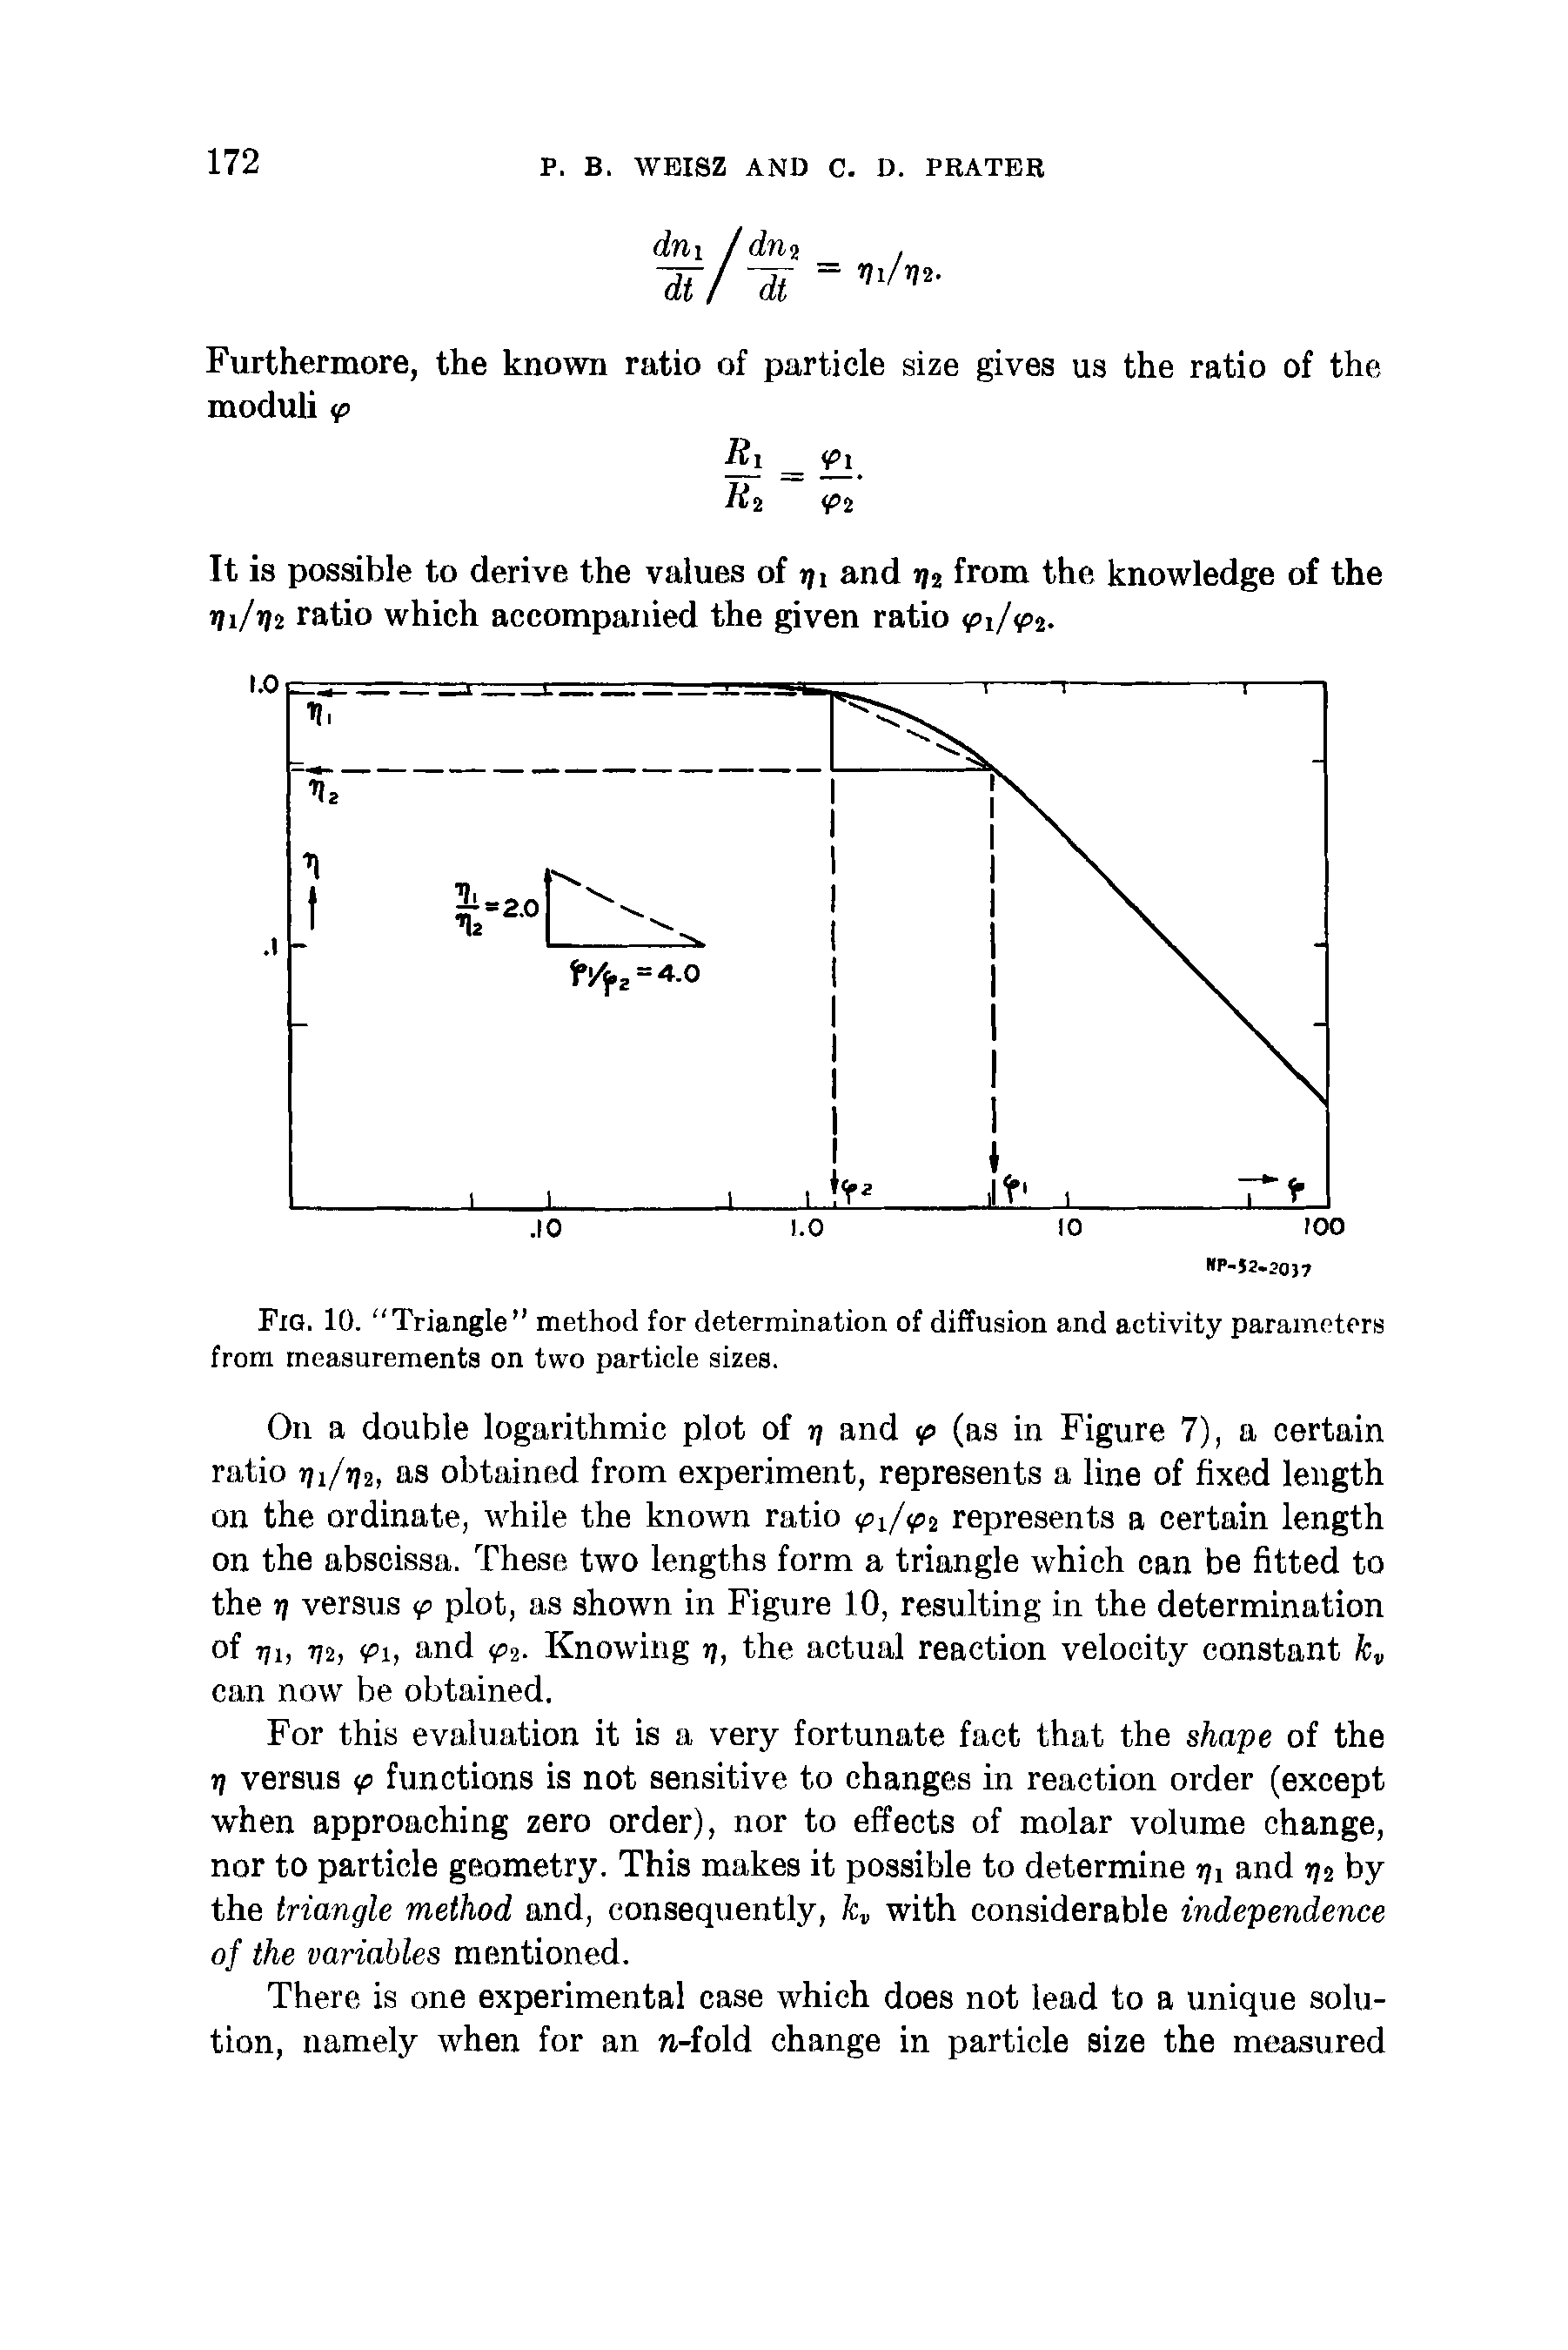 Fig. 10. Triangle" method for determination of diffusion and activity parameters from measurements on two particle sizes.